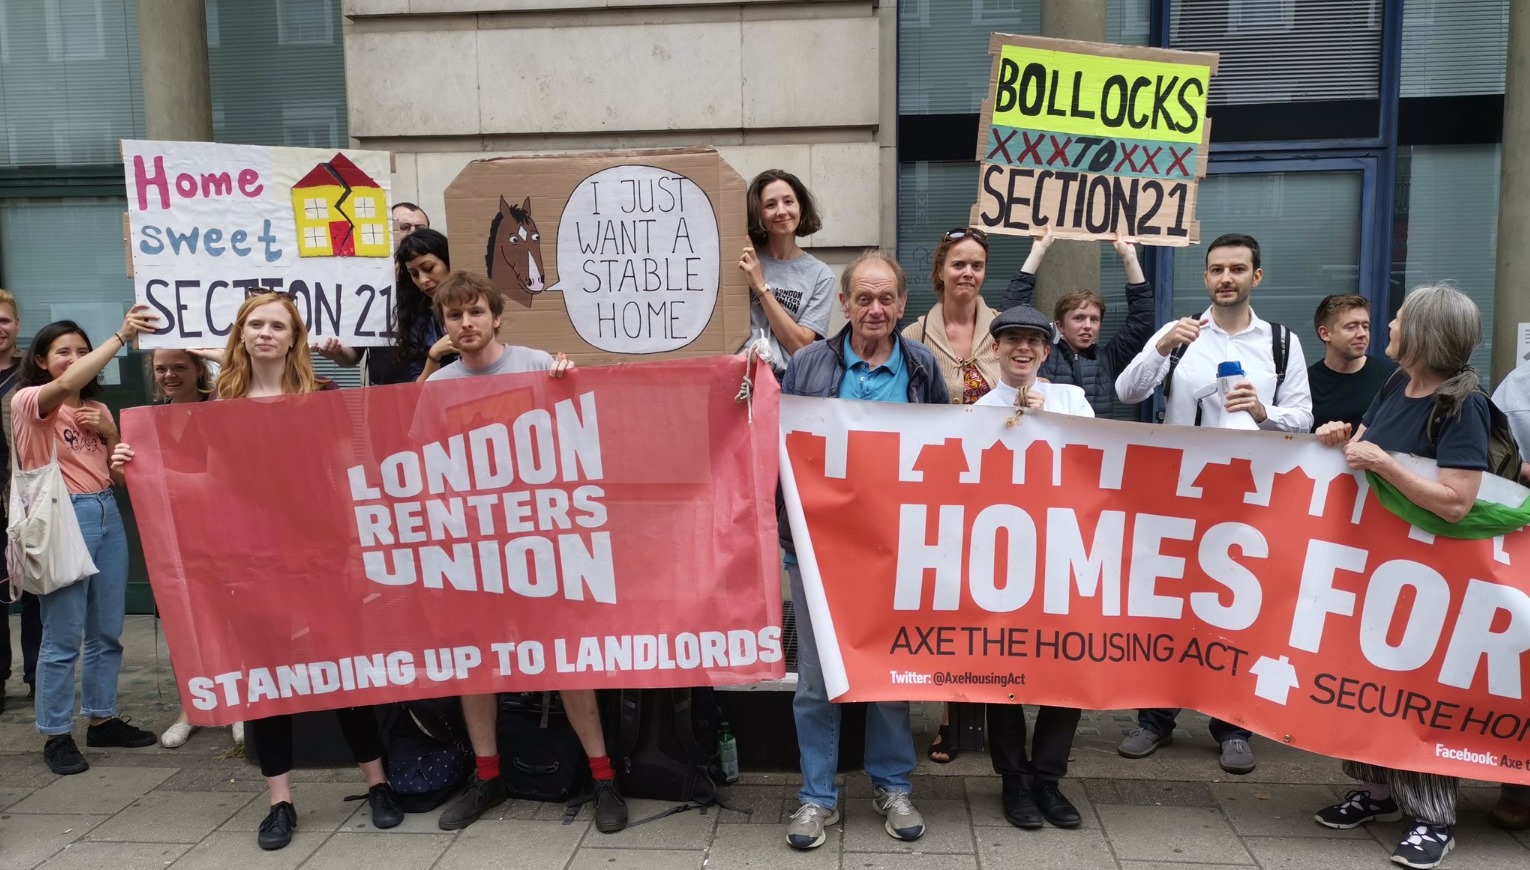 Organising for the right to housing in London